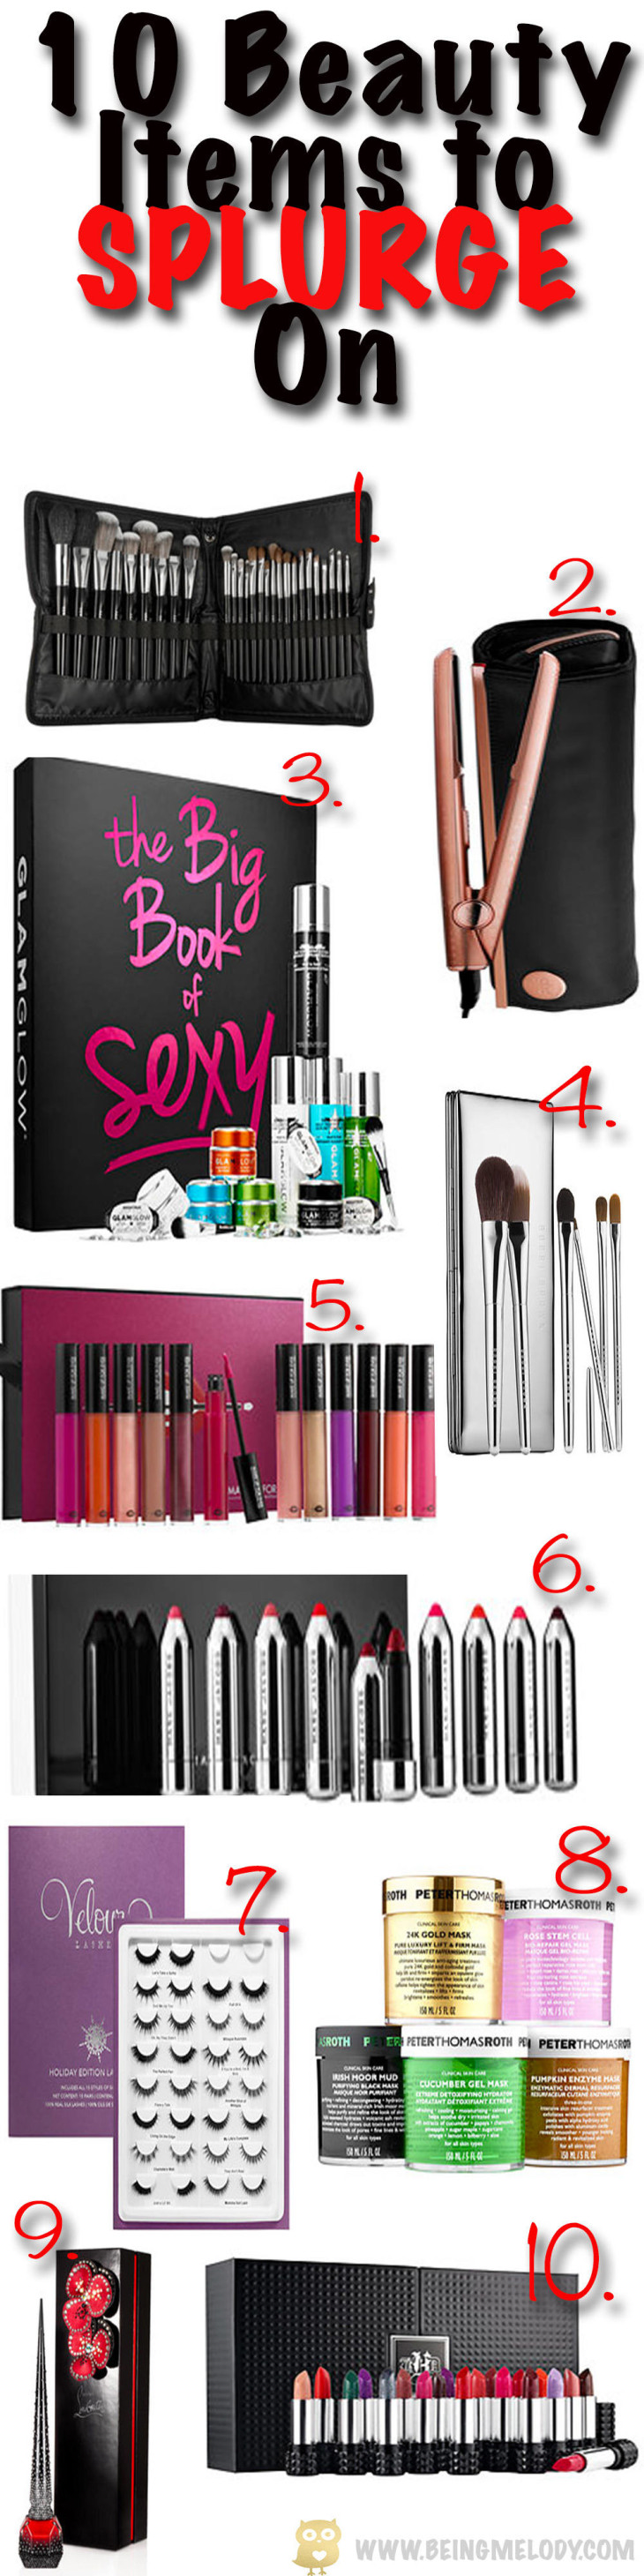 Ten Beauty Items to Splurge on During the Sephora VIB Sale